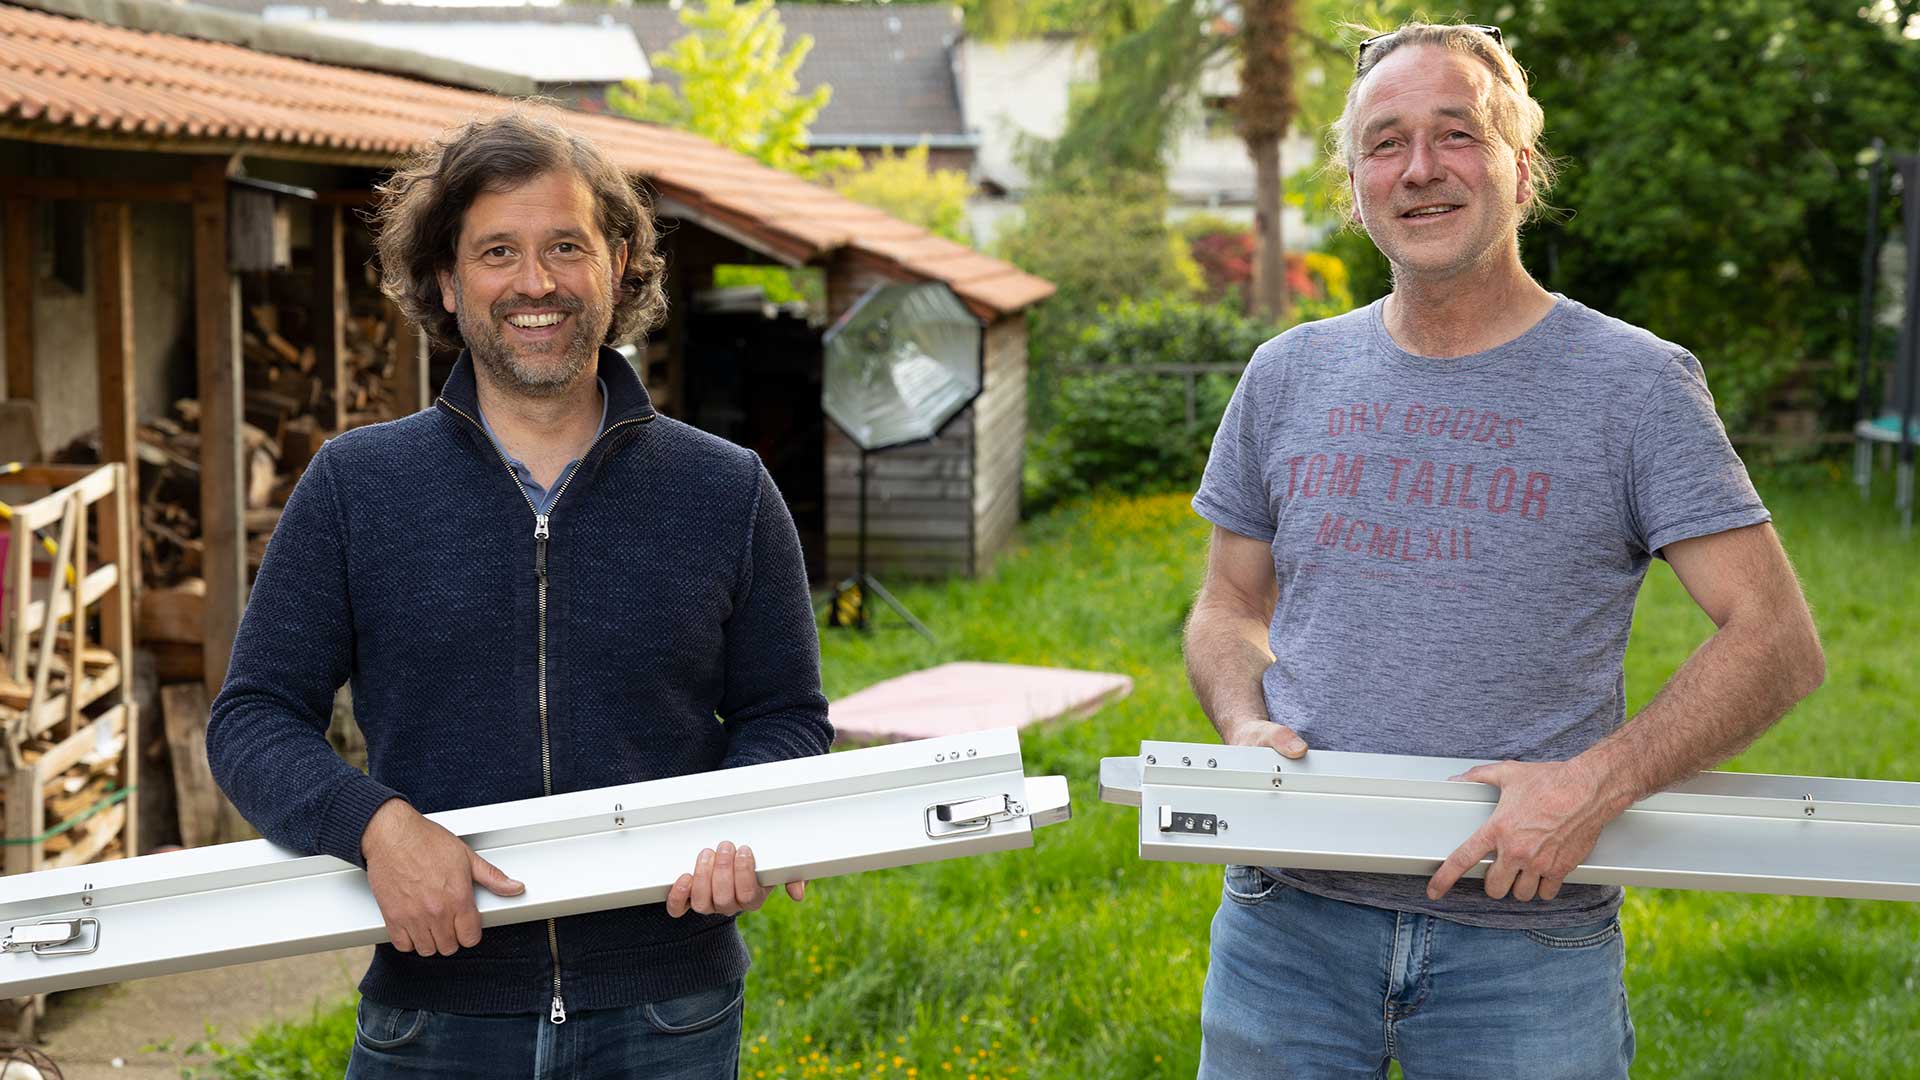 We tell something about us in the imprint: The picture shows the two inventors of the SkyHeia, Marco Barooah-Siebertz and Dr. Wolfgang Meschede. They are each holding an aluminium side rail of the SKYHEIA in their hands.